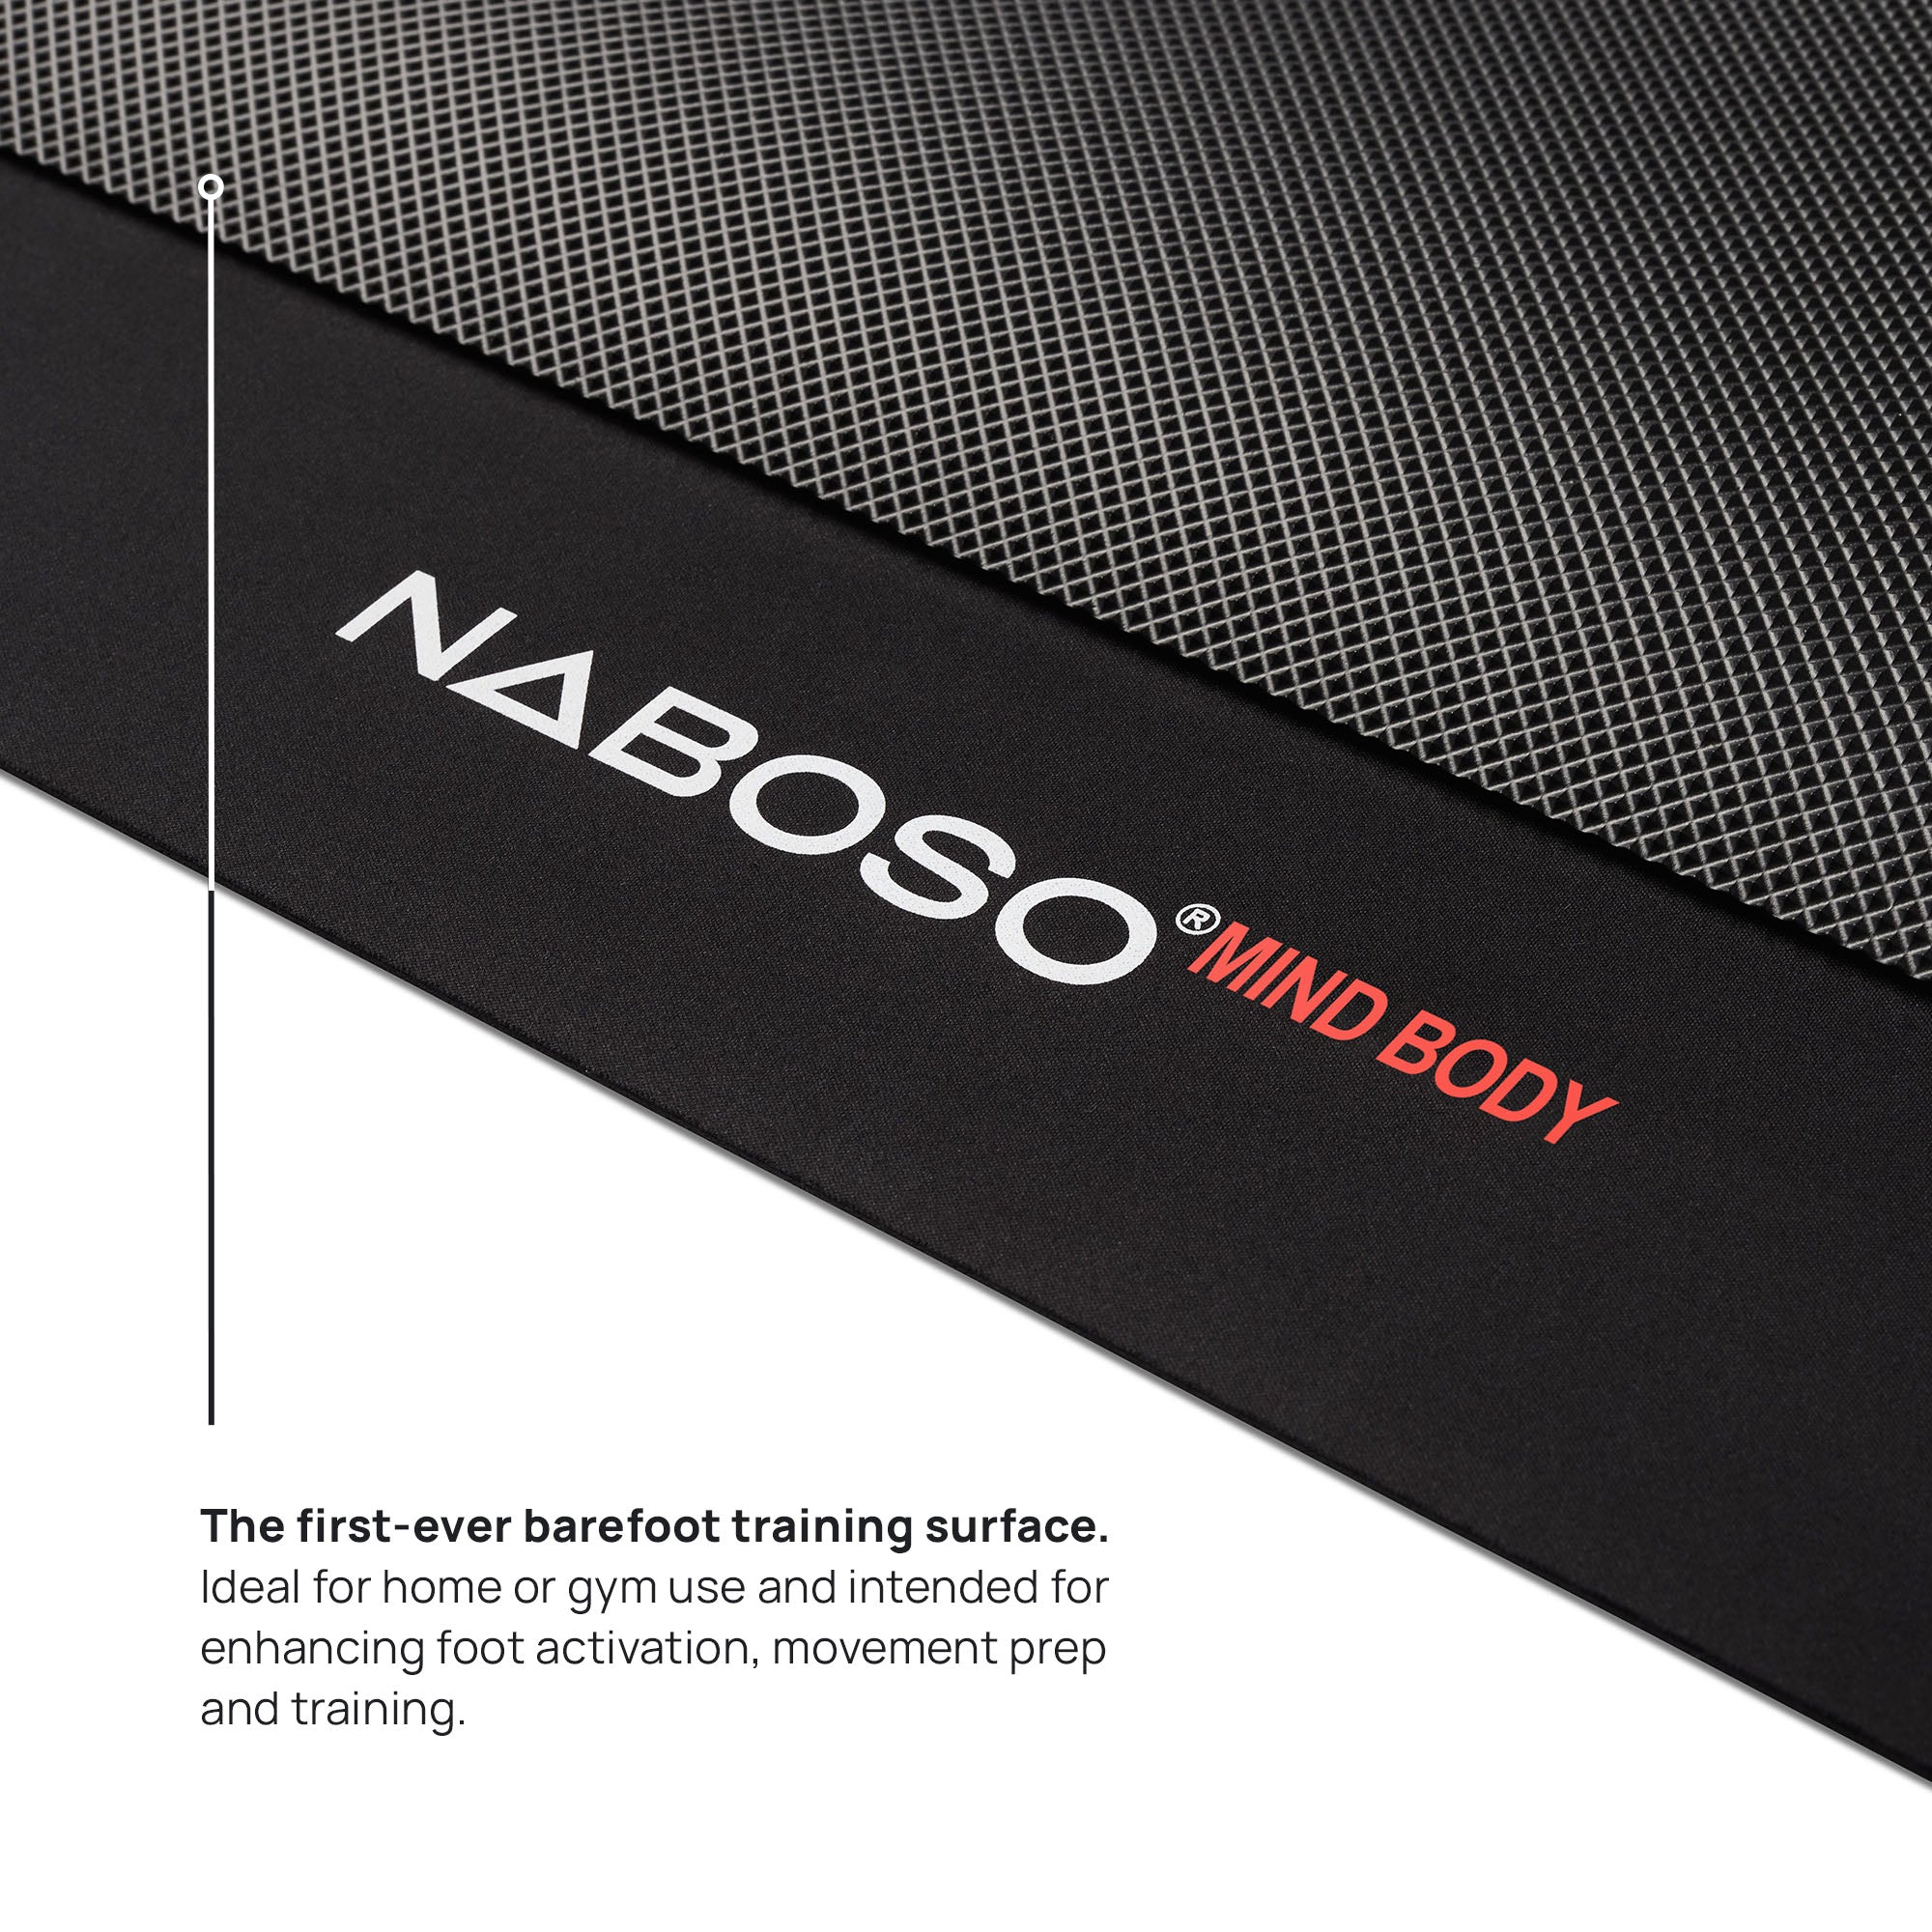 Close up of the Naboso Mind Body Mat, with text that mentions it's the first ever barefoot training surface and is ideal for home or gym use. Intended to enhance feet activation